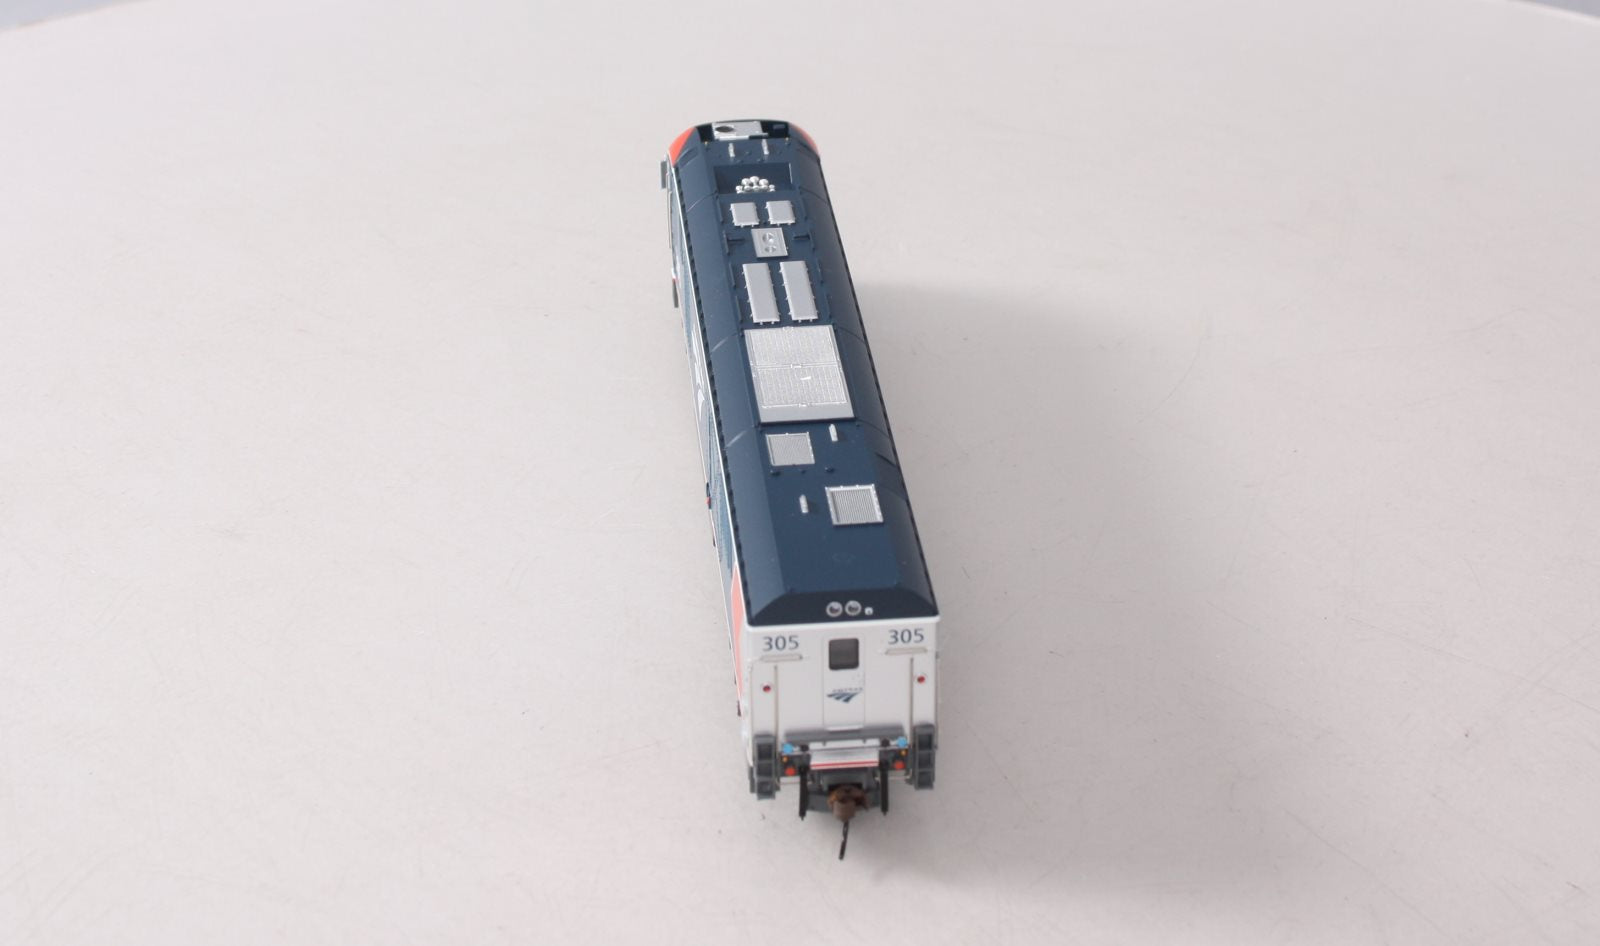 Bachmann 68302 HO Amtrak Siemans ALC-42 Charger with DCC/Sound #305